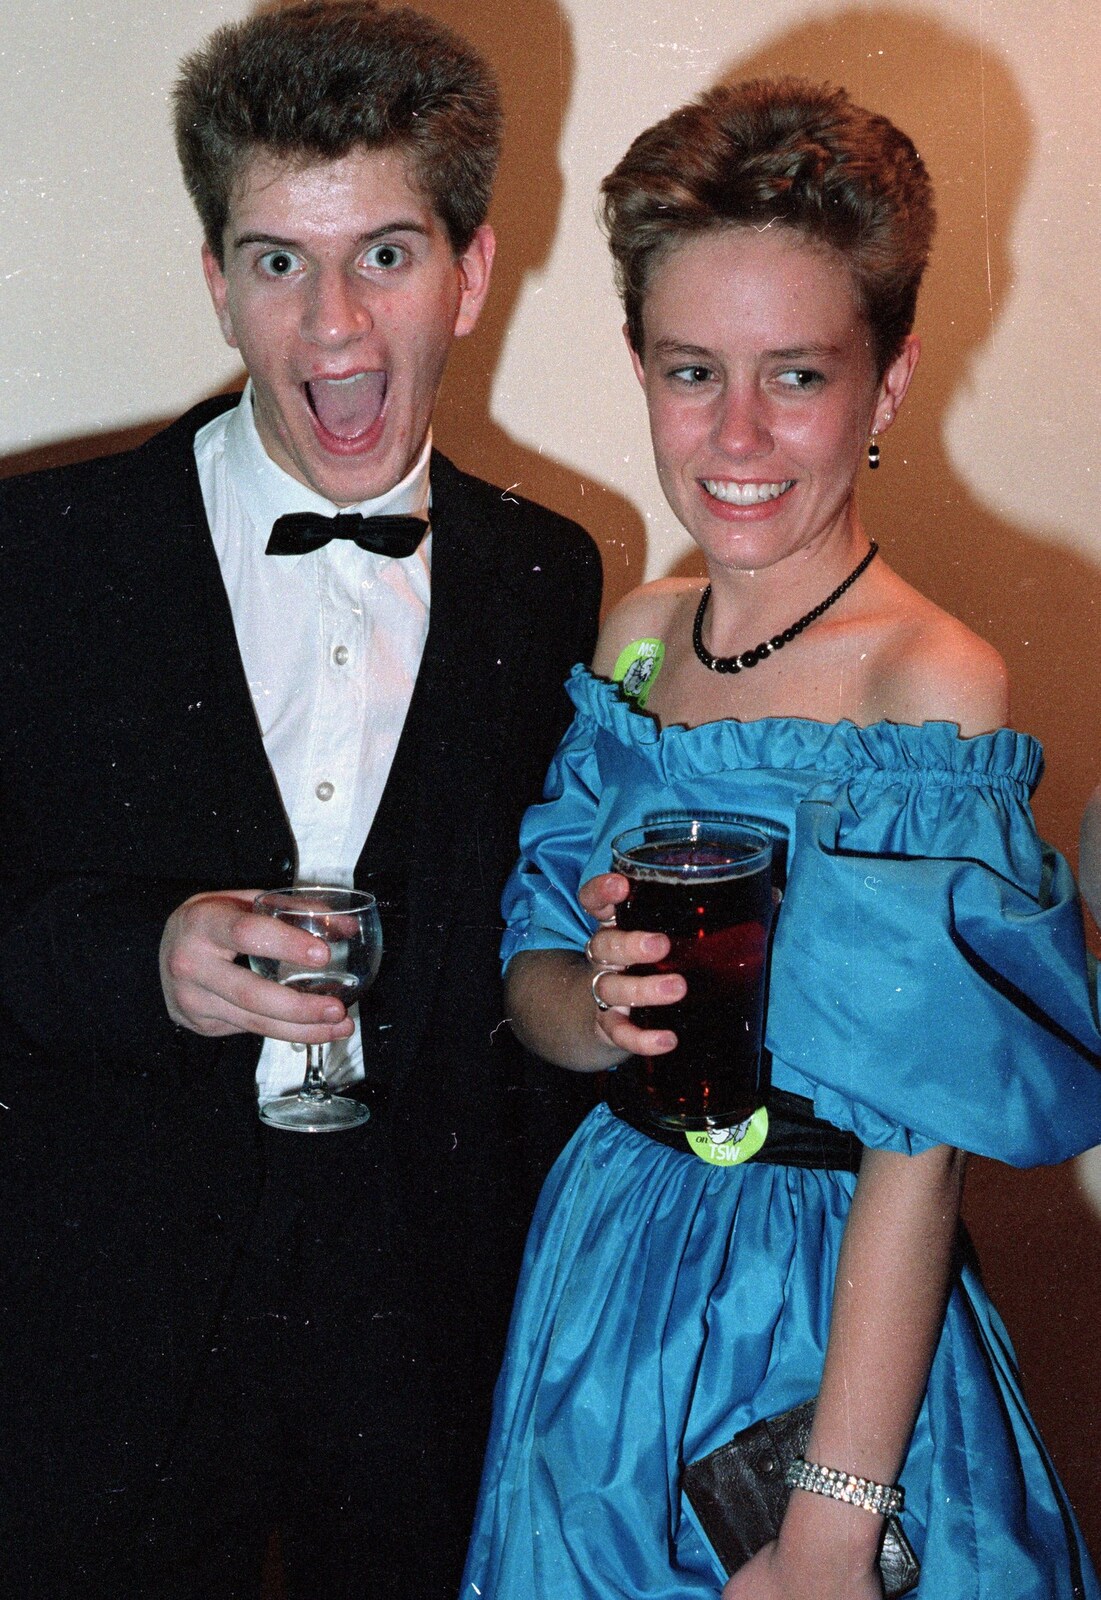 Posing with a pint from Uni: PPSU May Ball, The Guildhall, Plymouth - 4th May 1987